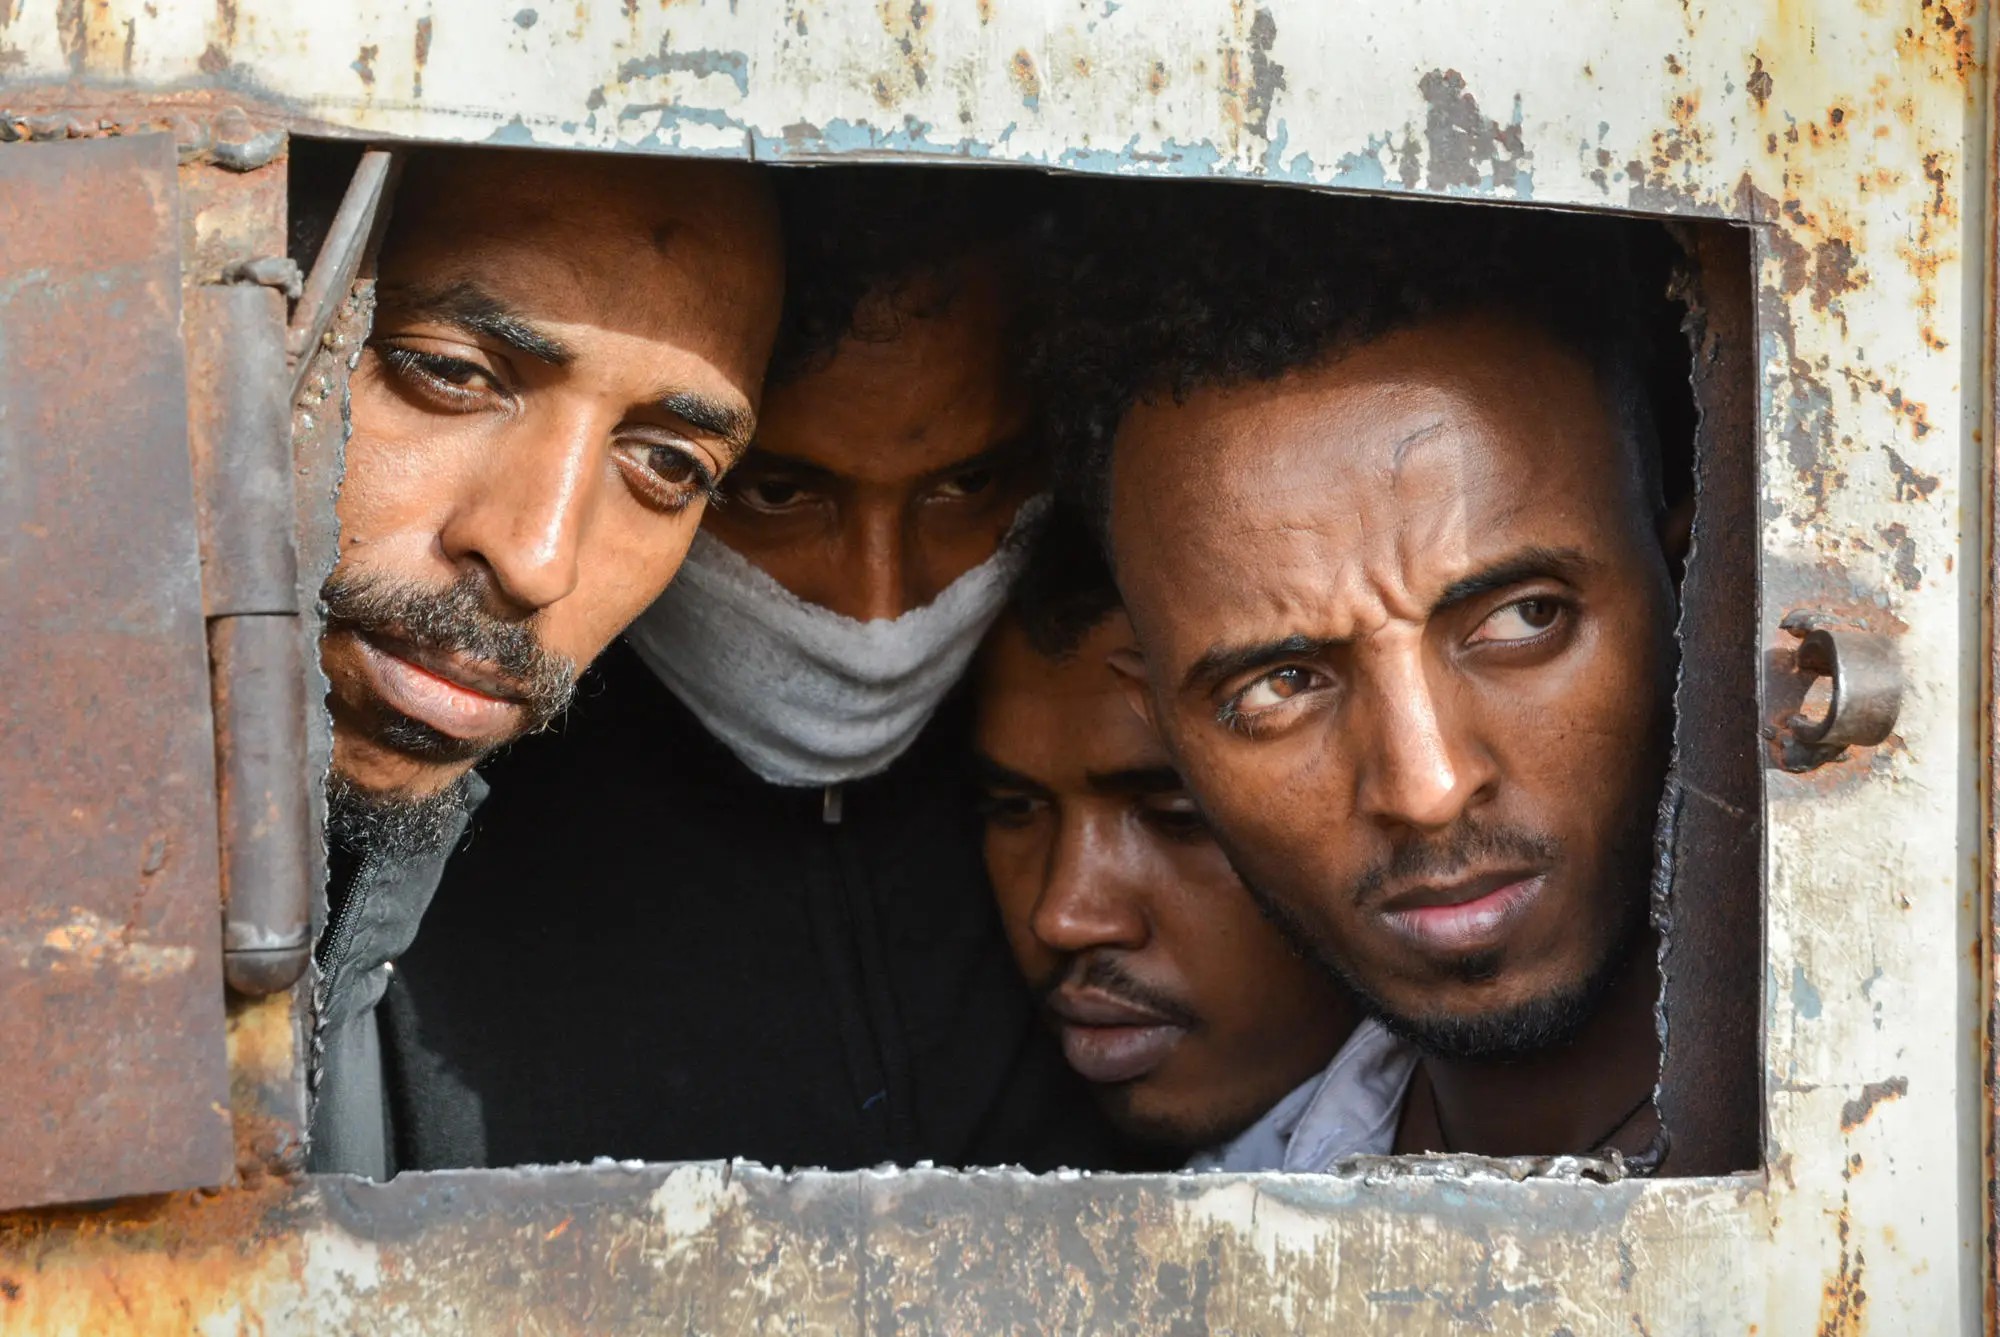 Out of sight, out of mind: refugees in Libya’s detention centres